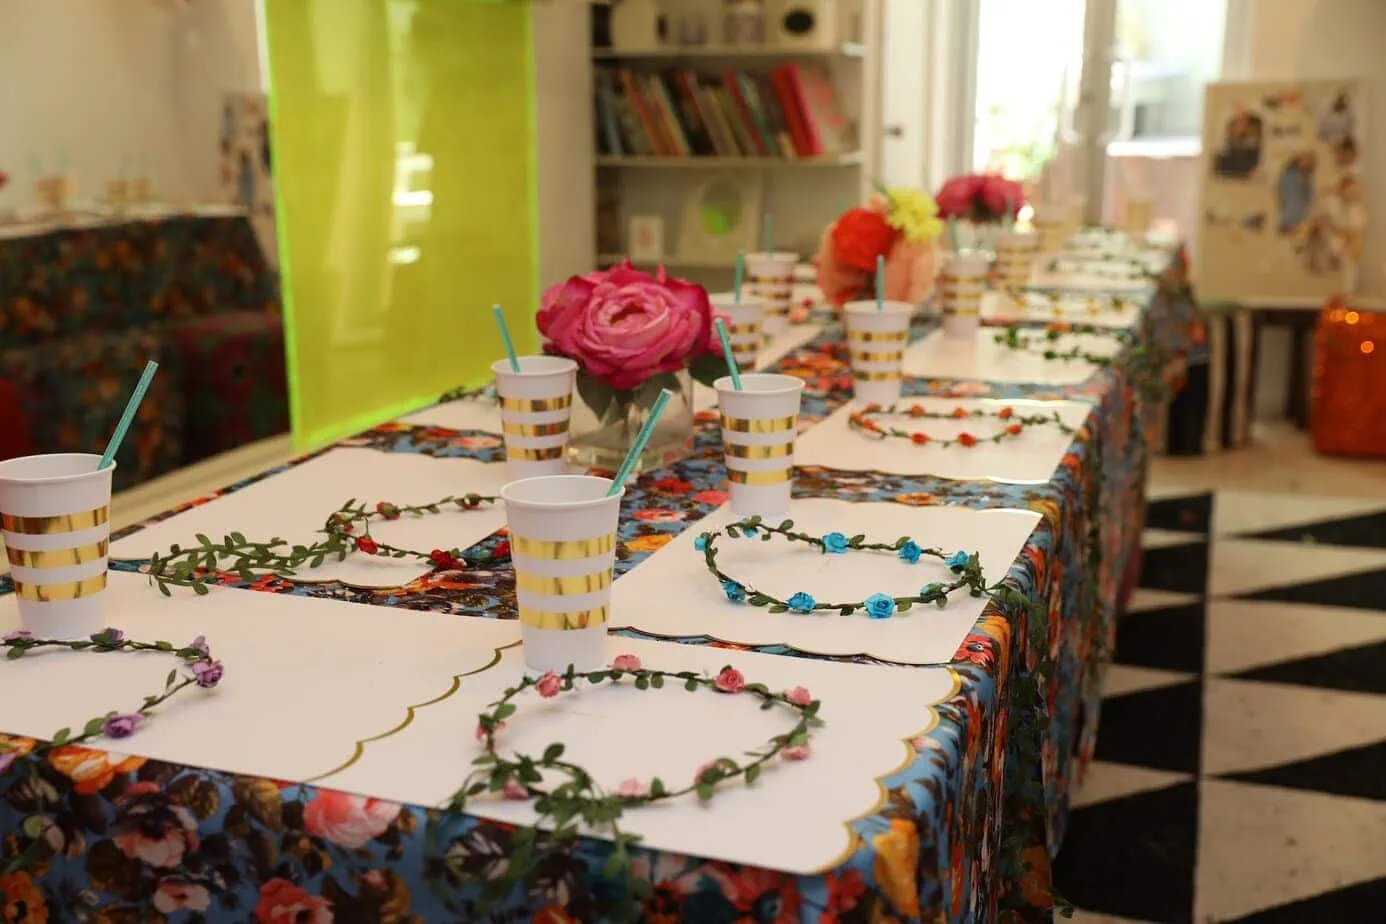 Table decorated for young girl's birthday party with florals